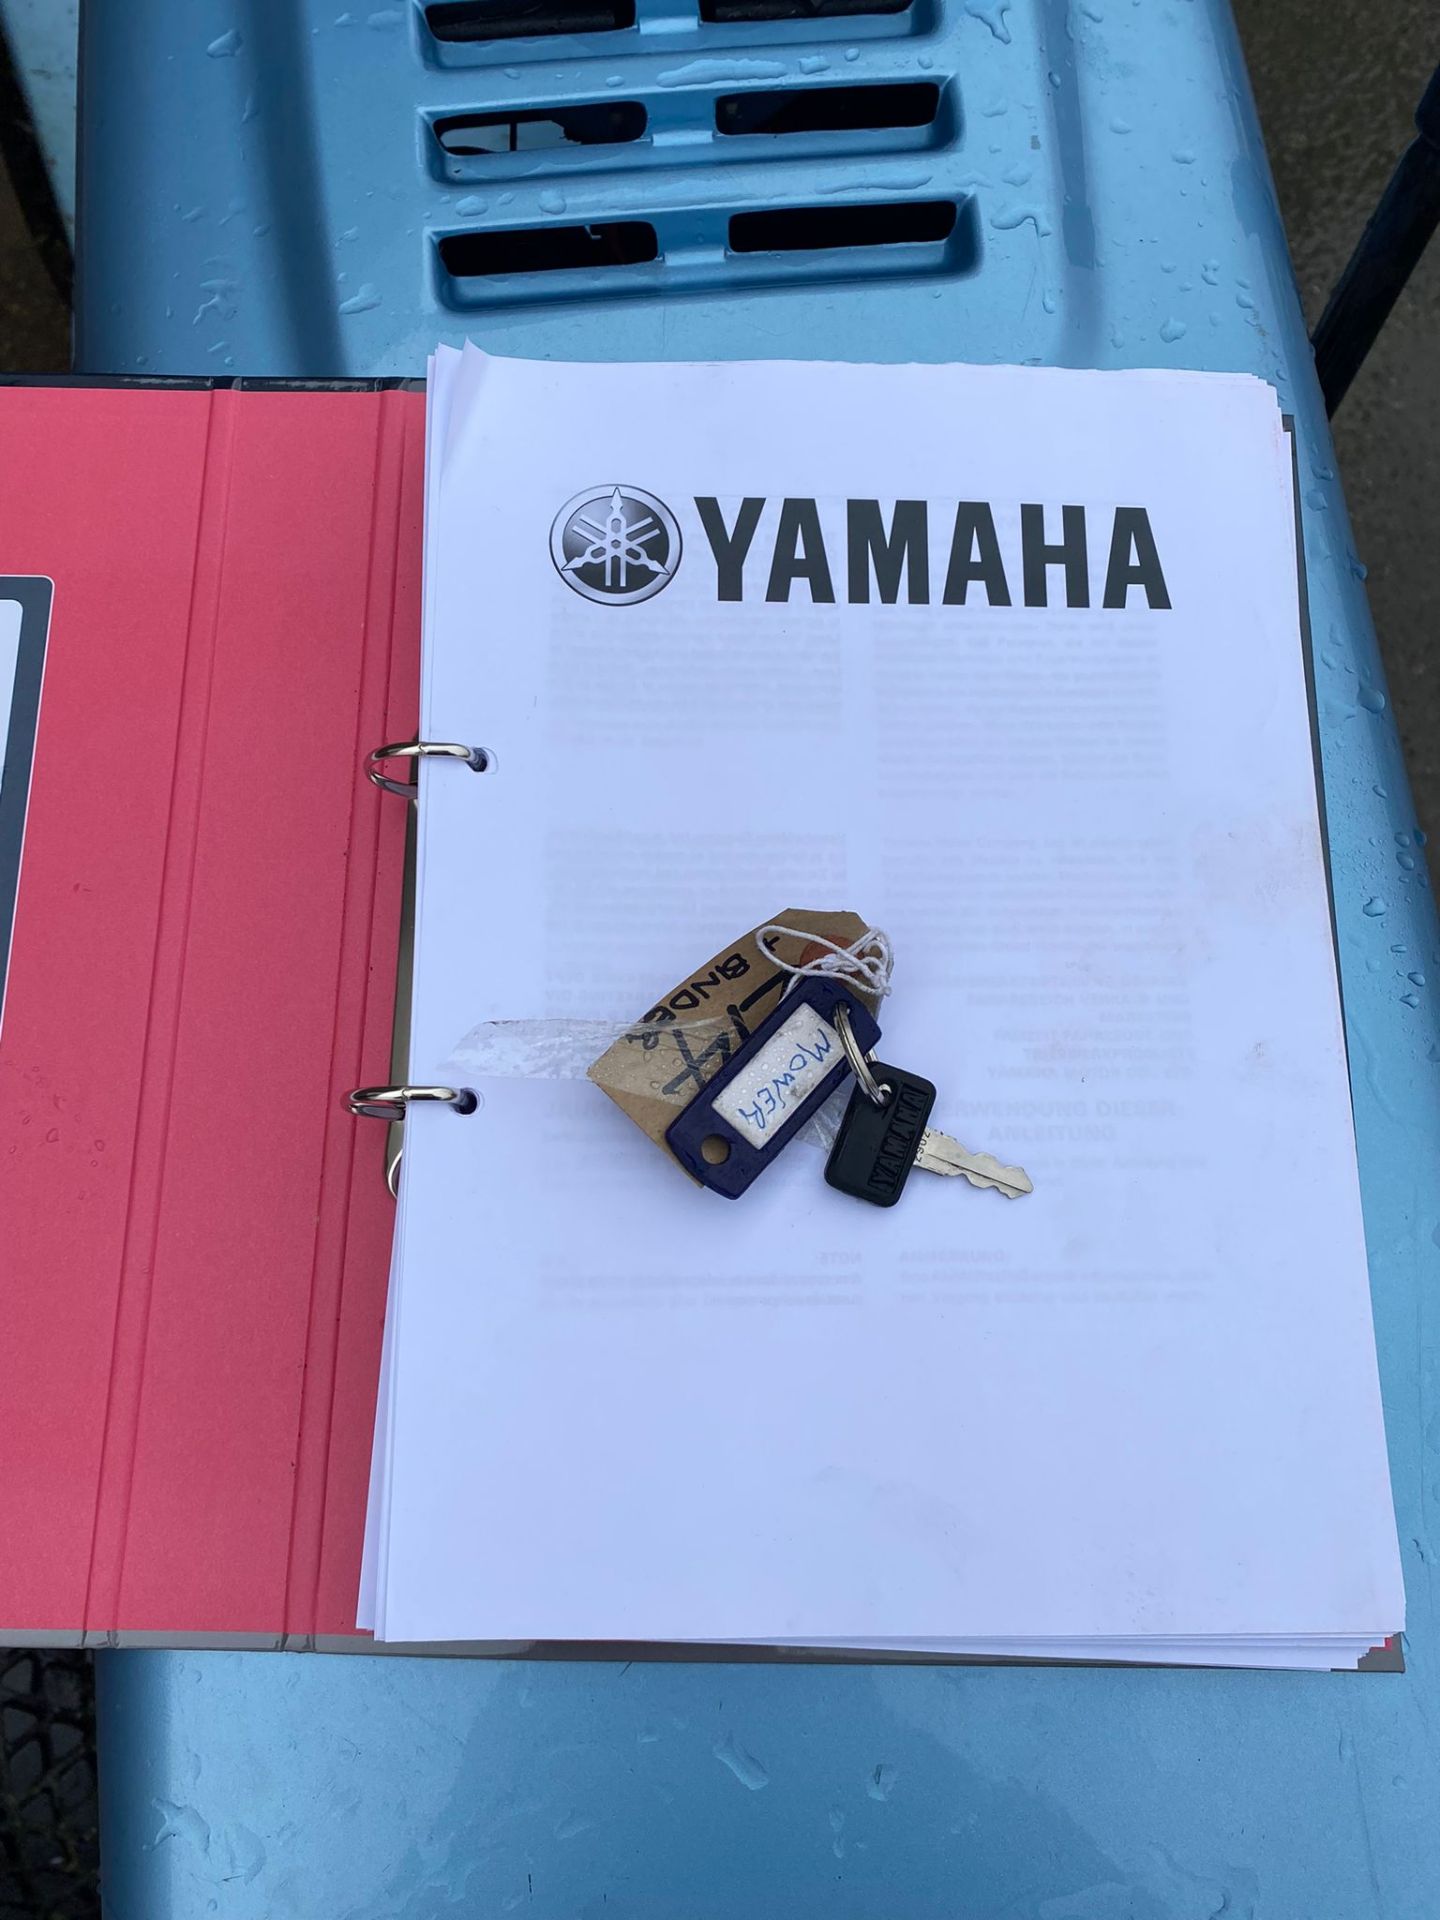 YAMAHA YT3600 RIDE ON MOWER VINTAGE WITH KEYS AND MANUAL - Image 5 of 5